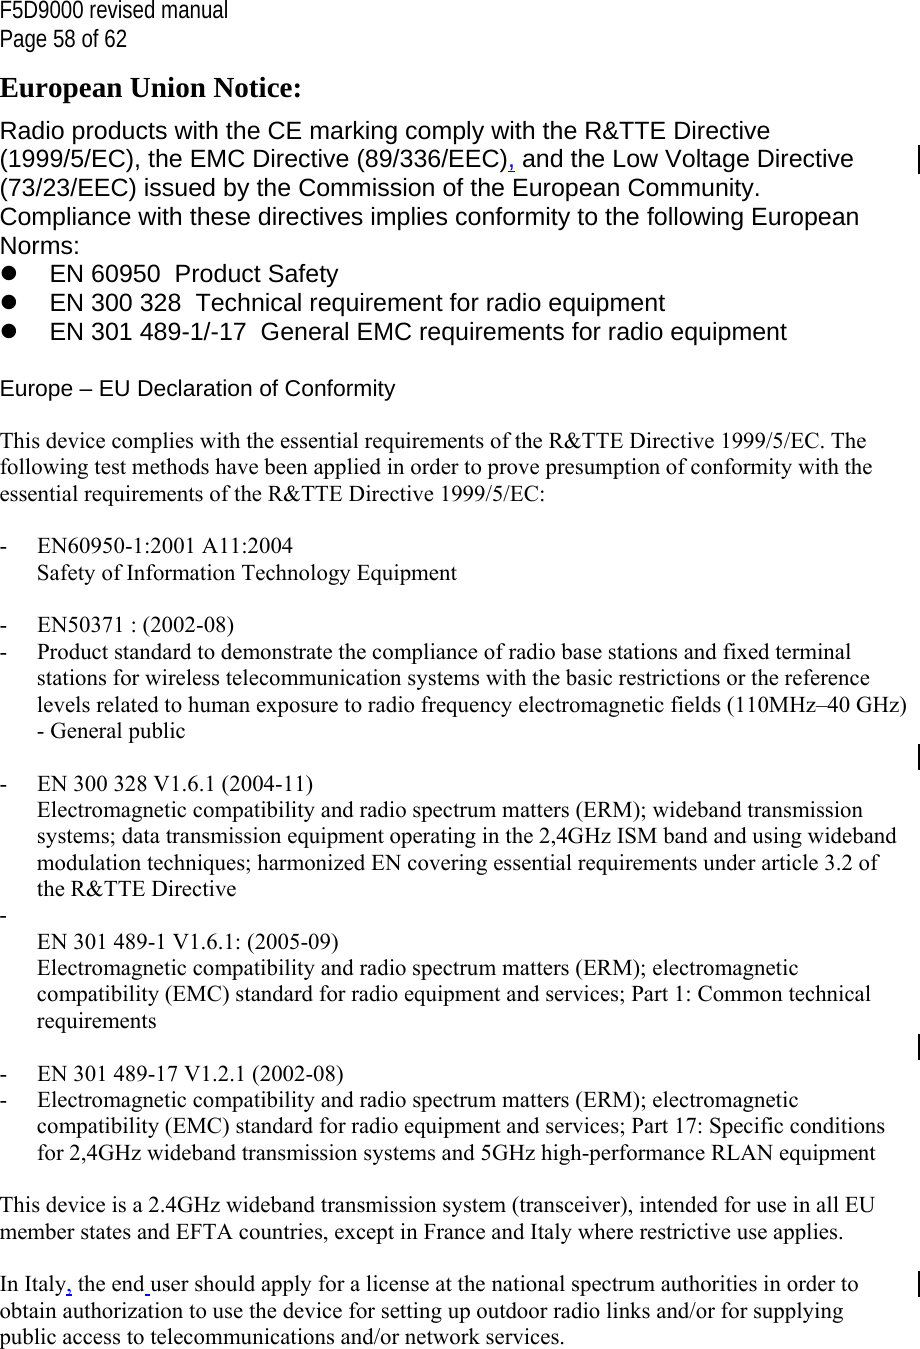 F5D9000 revised manual Page 58 of 62 European Union Notice: Radio products with the CE marking comply with the R&amp;TTE Directive (1999/5/EC), the EMC Directive (89/336/EEC), and the Low Voltage Directive (73/23/EEC) issued by the Commission of the European Community. Compliance with these directives implies conformity to the following European Norms:   EN 60950  Product Safety   EN 300 328  Technical requirement for radio equipment   EN 301 489-1/-17  General EMC requirements for radio equipment  Europe – EU Declaration of Conformity  This device complies with the essential requirements of the R&amp;TTE Directive 1999/5/EC. The following test methods have been applied in order to prove presumption of conformity with the essential requirements of the R&amp;TTE Directive 1999/5/EC:  - EN60950-1:2001 A11:2004 Safety of Information Technology Equipment  - EN50371 : (2002-08) -  Product standard to demonstrate the compliance of radio base stations and fixed terminal stations for wireless telecommunication systems with the basic restrictions or the reference levels related to human exposure to radio frequency electromagnetic fields (110MHz–40 GHz) - General public  -  EN 300 328 V1.6.1 (2004-11) Electromagnetic compatibility and radio spectrum matters (ERM); wideband transmission systems; data transmission equipment operating in the 2,4GHz ISM band and using wideband modulation techniques; harmonized EN covering essential requirements under article 3.2 of the R&amp;TTE Directive -  EN 301 489-1 V1.6.1: (2005-09) Electromagnetic compatibility and radio spectrum matters (ERM); electromagnetic compatibility (EMC) standard for radio equipment and services; Part 1: Common technical requirements  -  EN 301 489-17 V1.2.1 (2002-08)  -  Electromagnetic compatibility and radio spectrum matters (ERM); electromagnetic compatibility (EMC) standard for radio equipment and services; Part 17: Specific conditions for 2,4GHz wideband transmission systems and 5GHz high-performance RLAN equipment  This device is a 2.4GHz wideband transmission system (transceiver), intended for use in all EU member states and EFTA countries, except in France and Italy where restrictive use applies.  In Italy, the end user should apply for a license at the national spectrum authorities in order to obtain authorization to use the device for setting up outdoor radio links and/or for supplying public access to telecommunications and/or network services.  